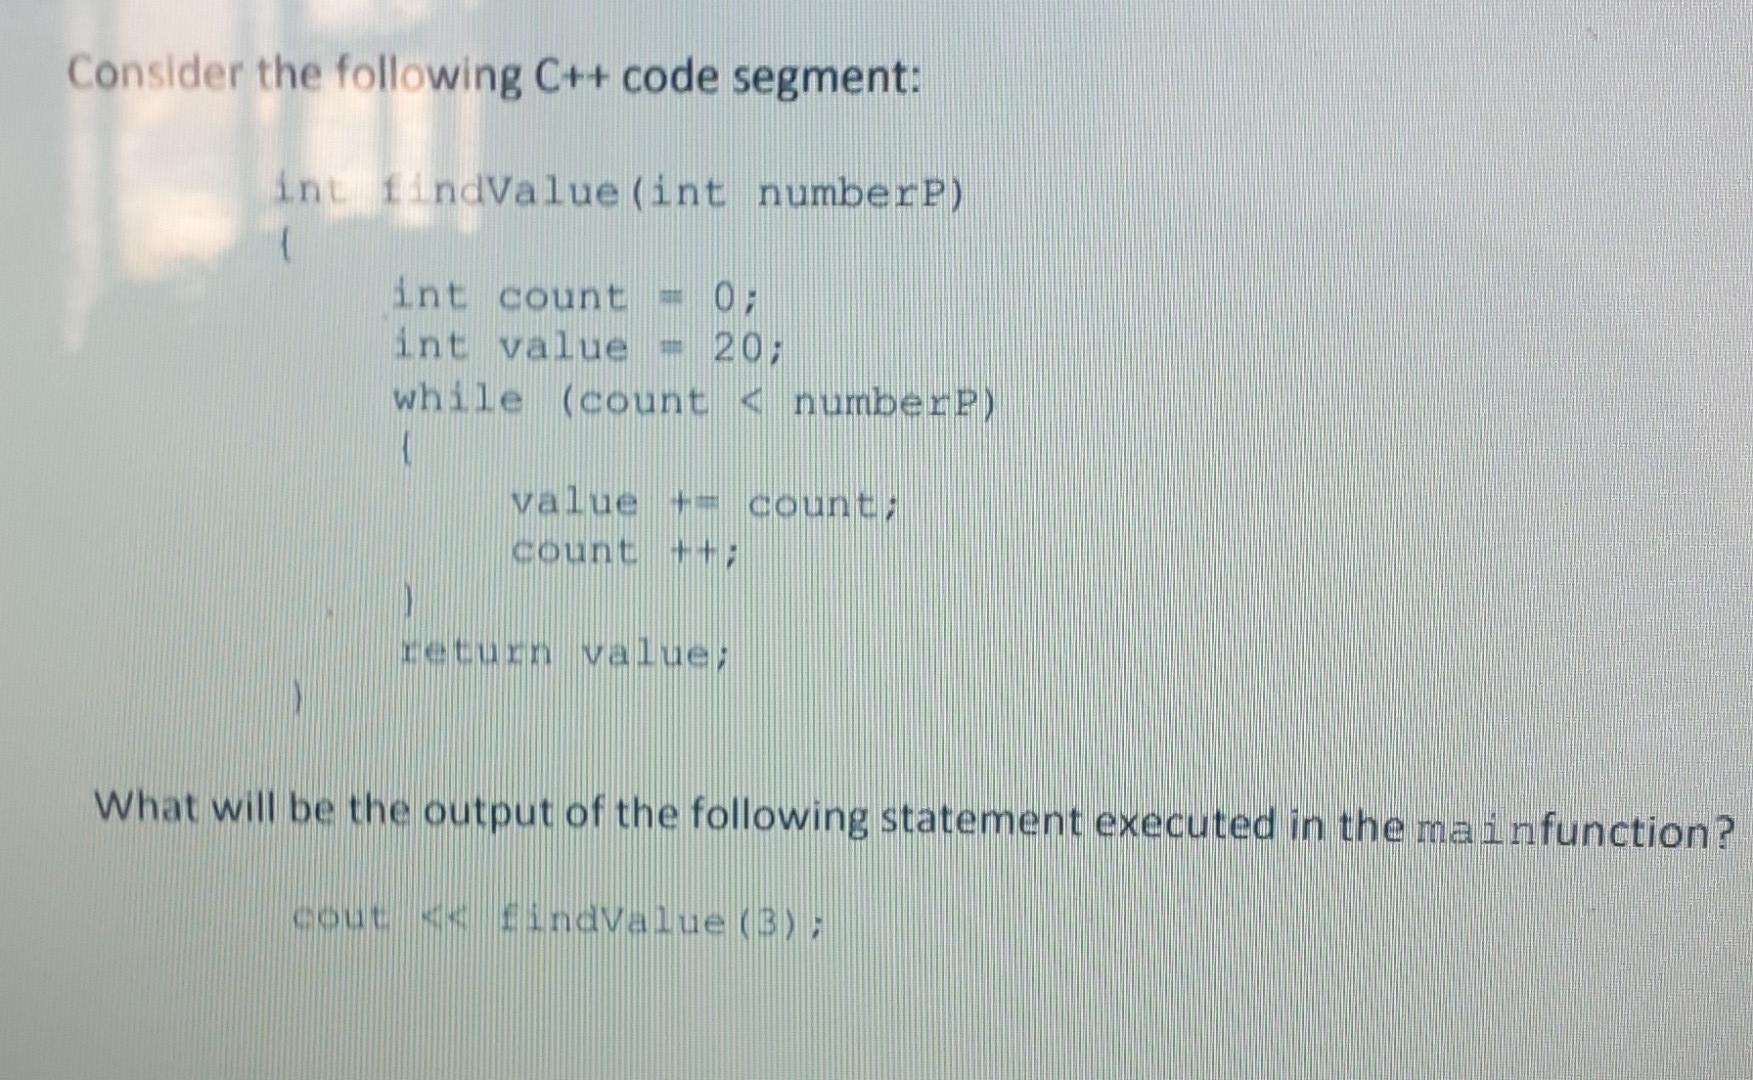 Consider the following C++ code segment: int findValue (int numberP) ( int count = 0; int value = 20; while